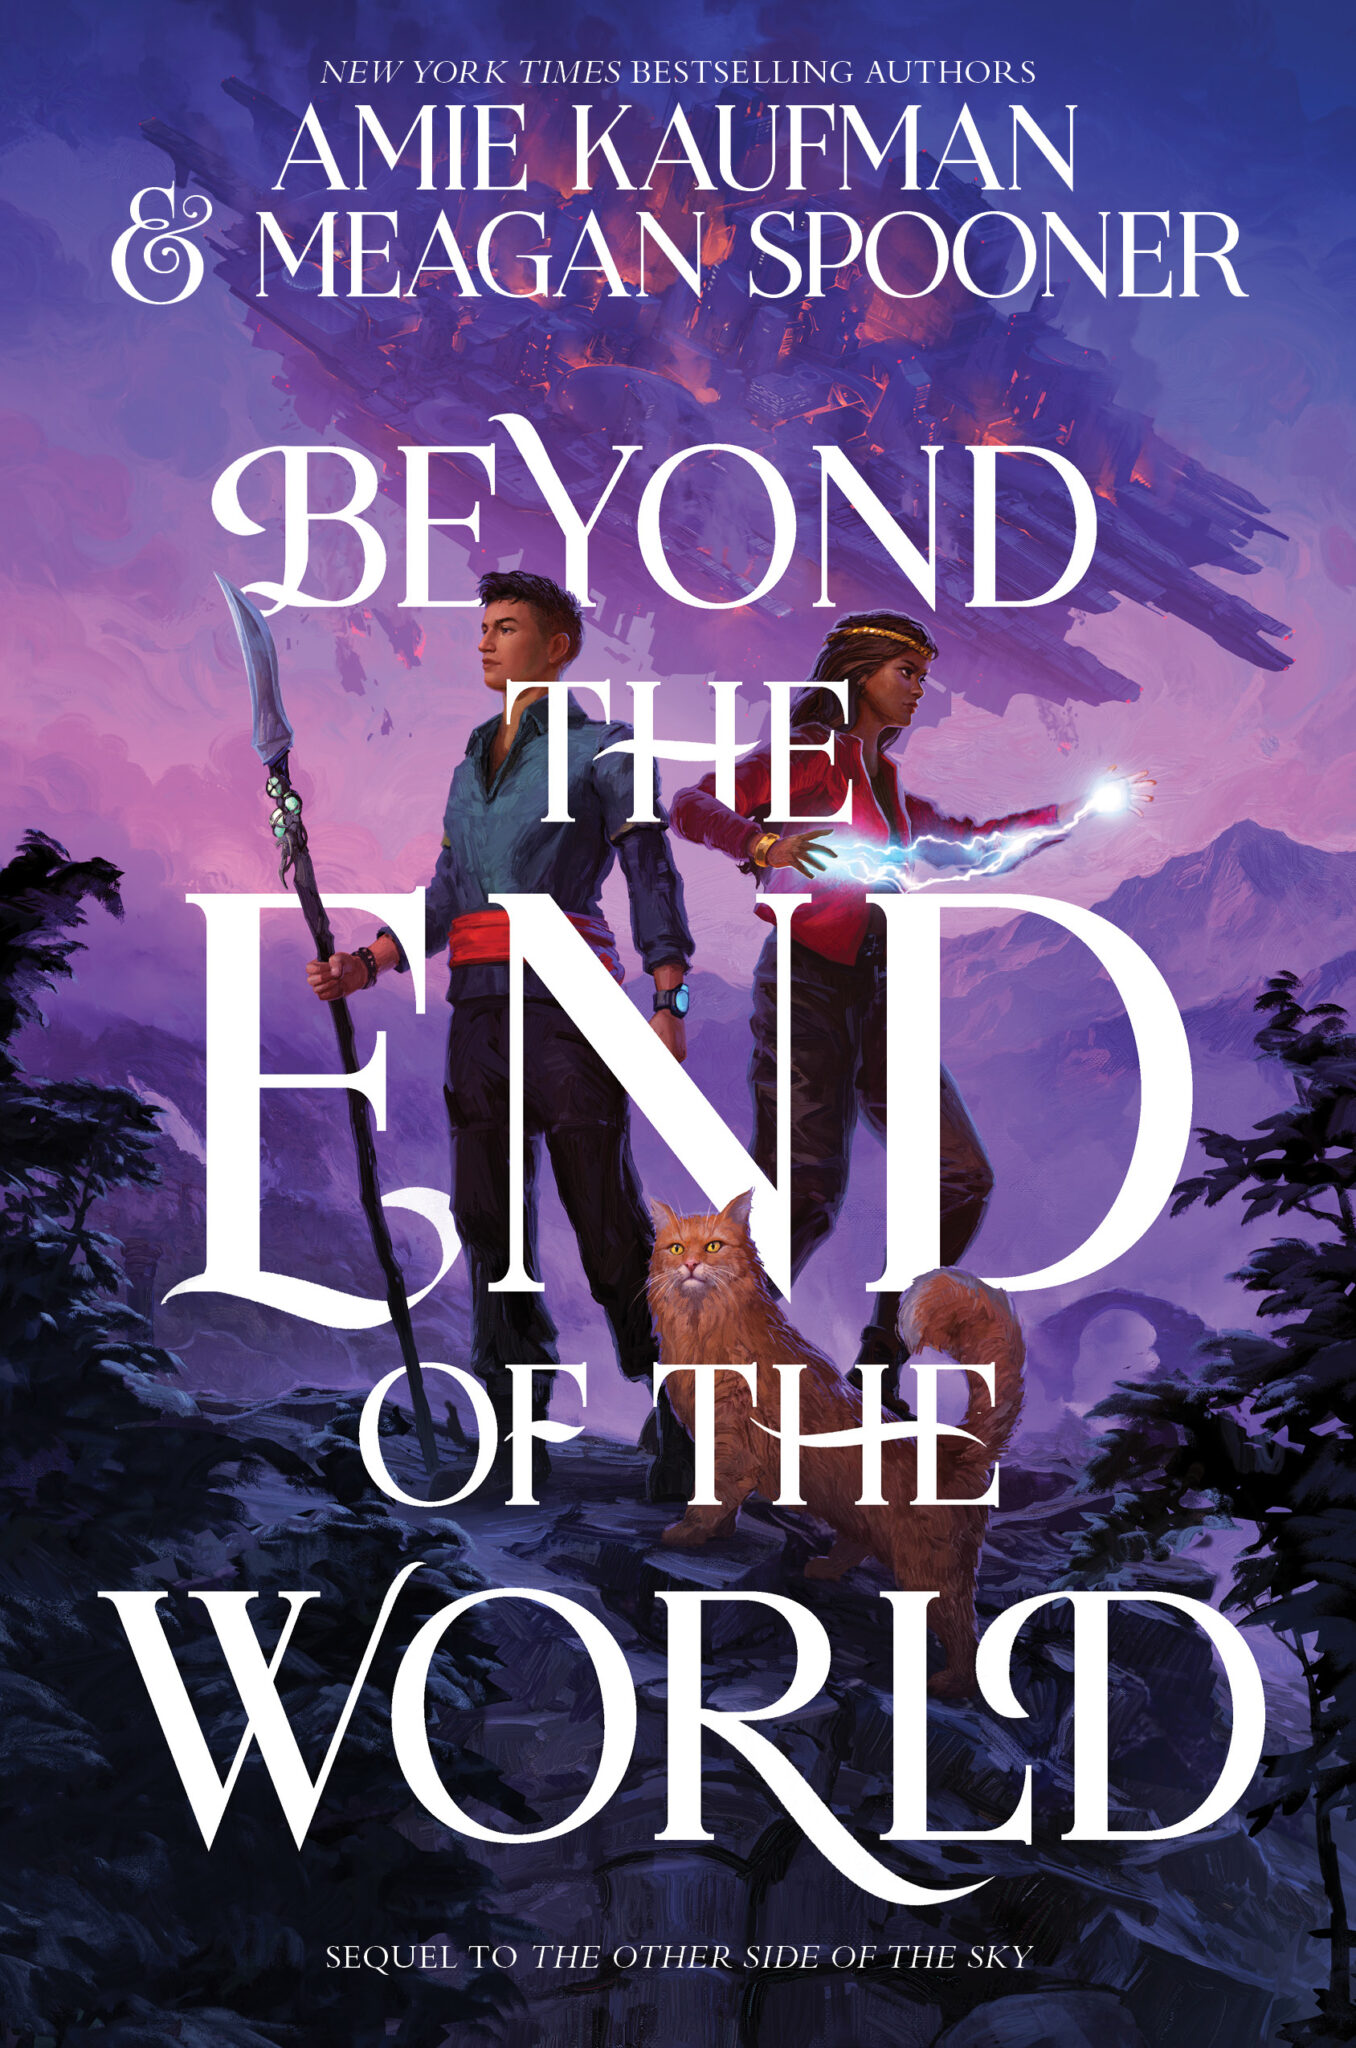 Beyond the End of the World - Amie Kaufman